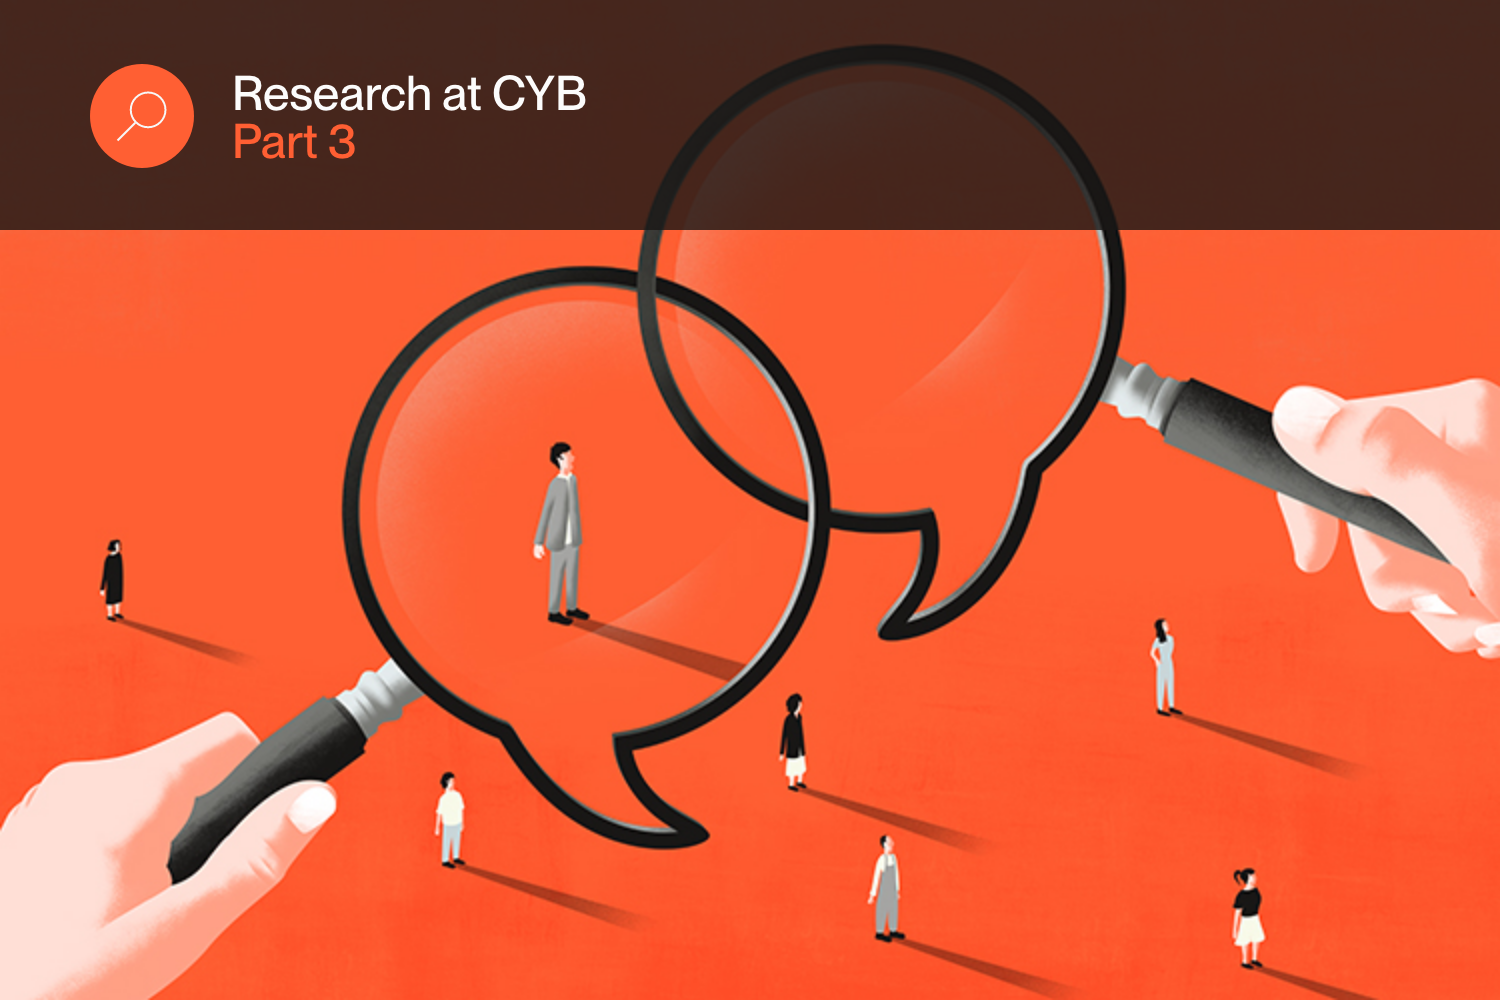 Research at CYB - Part 3